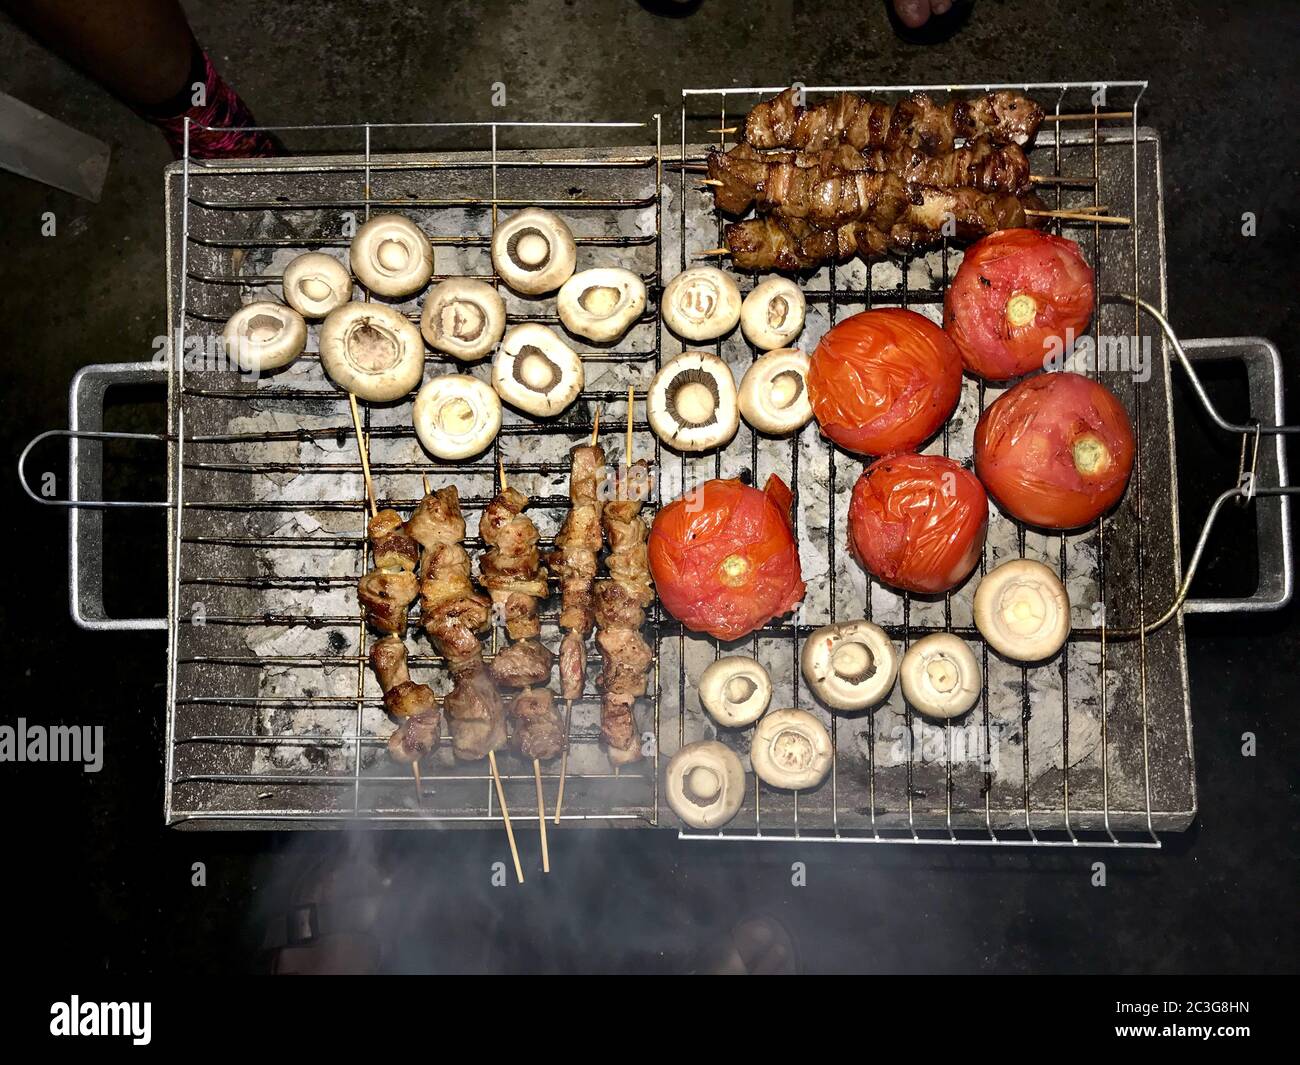 Turkish Style Lamb Kebab Shish Skewer Cooked with Mushrooms and Roasted Tomatoes on Street Barbecue Mangal. Traditional Cooking. Stock Photo